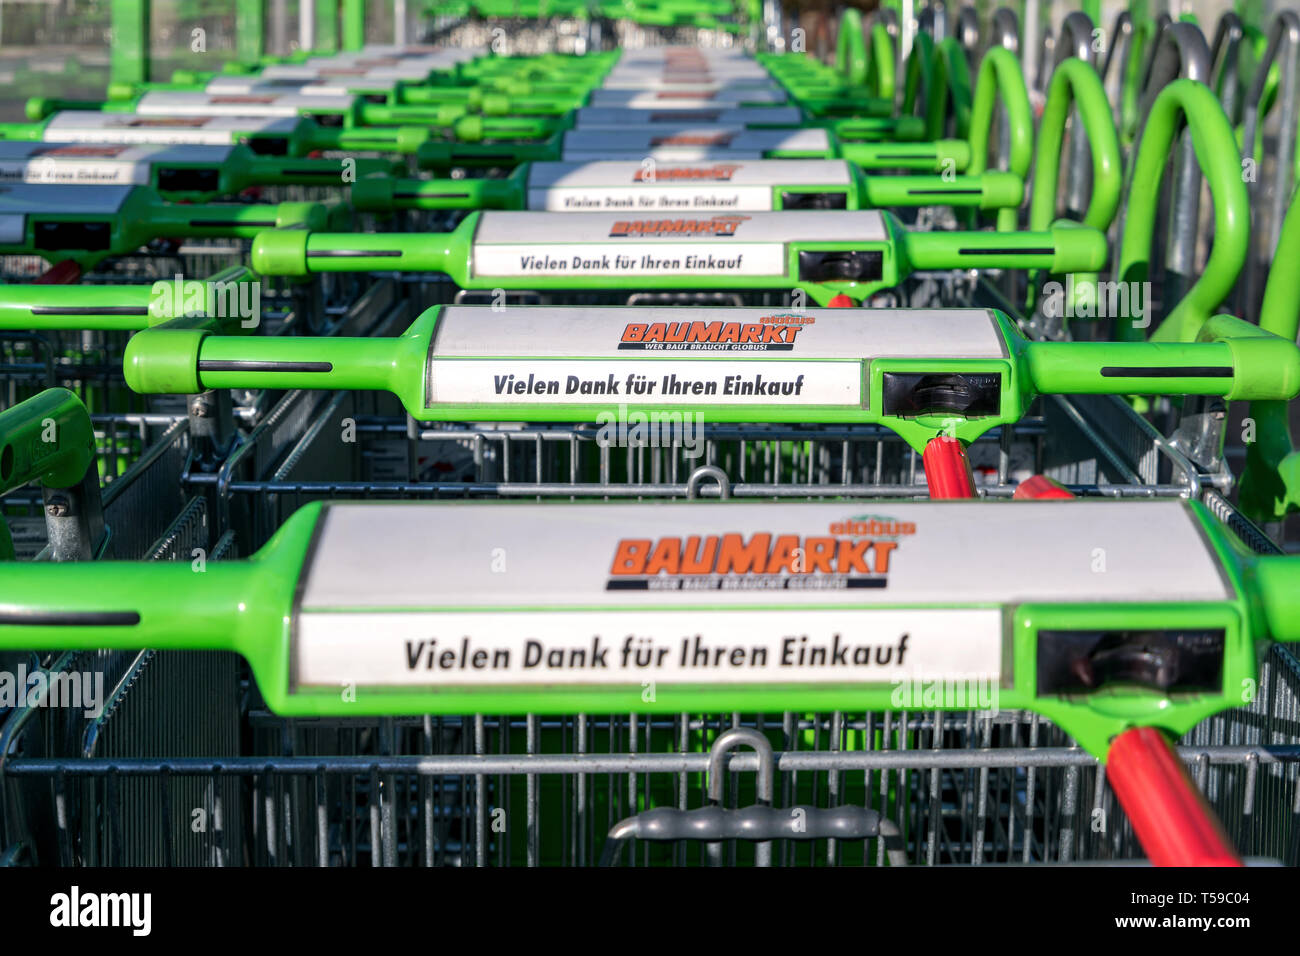 Baumarkt shopping carts. Globus is a German chain of hypermarkets, stores and stores Stock Photo - Alamy